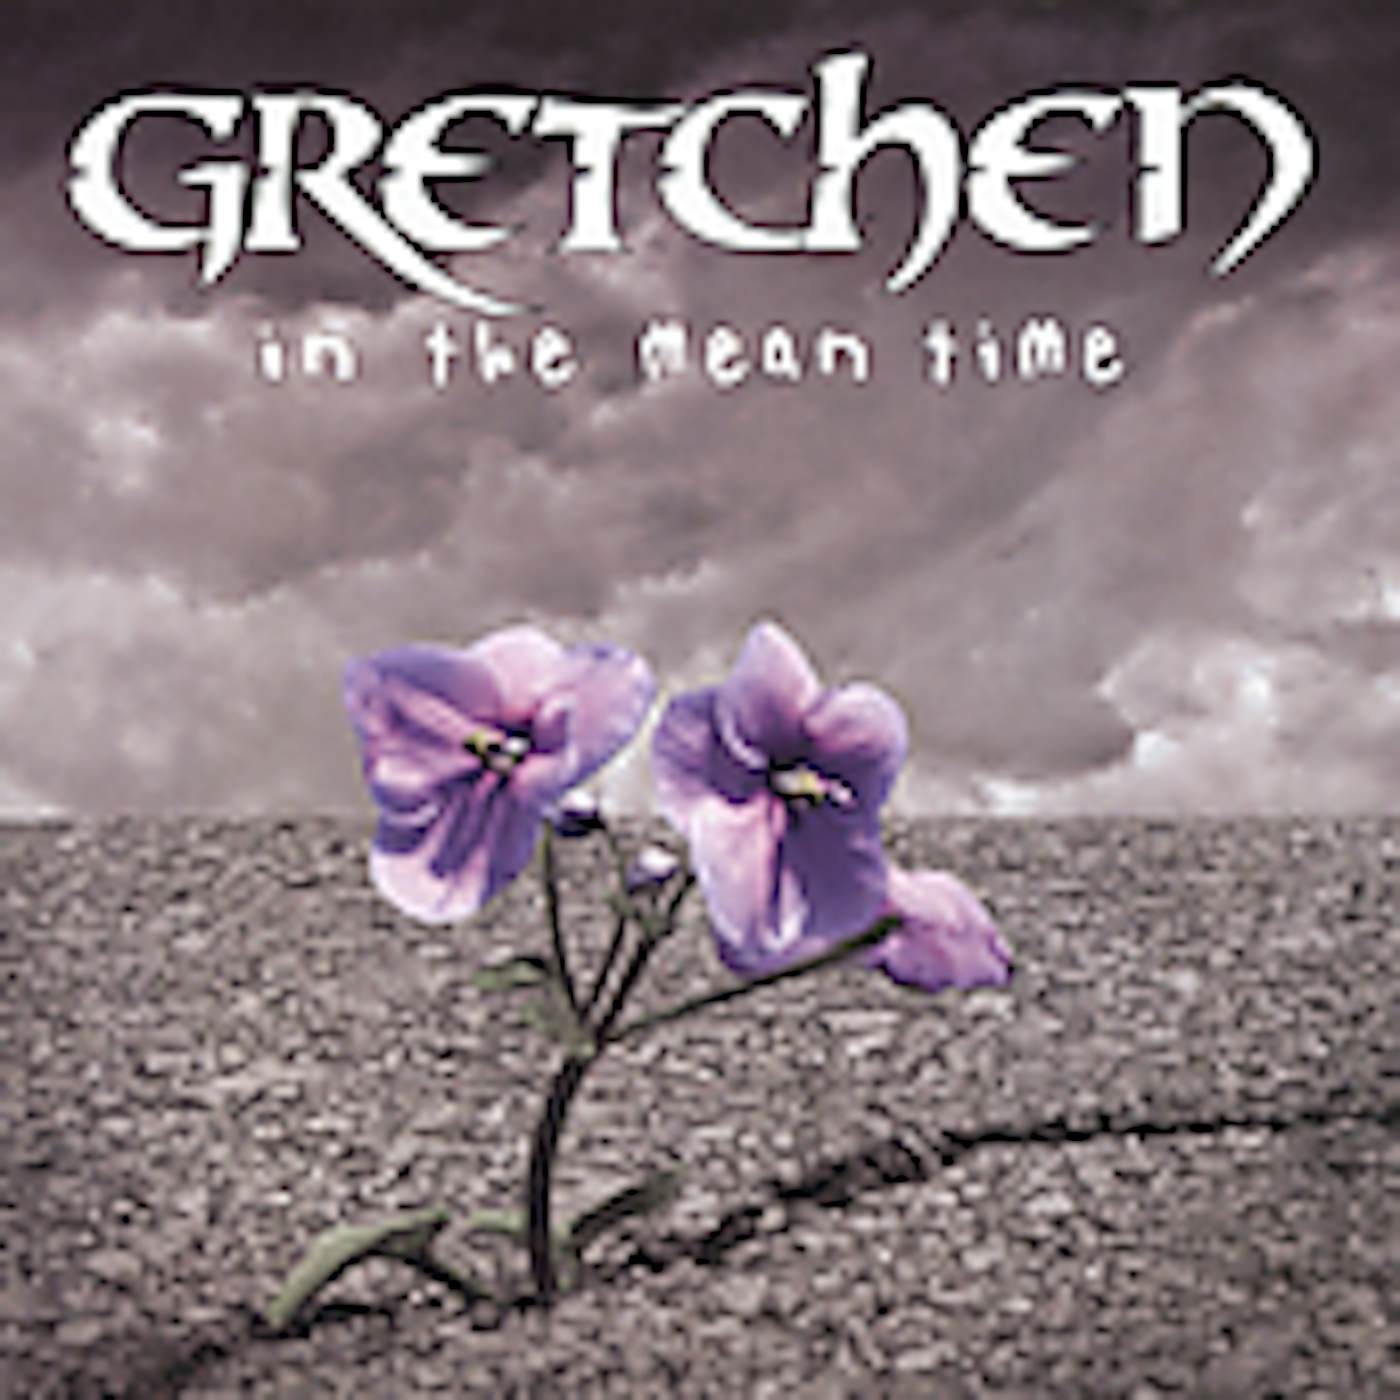 Gretchen IN THE MEAN TIME CD